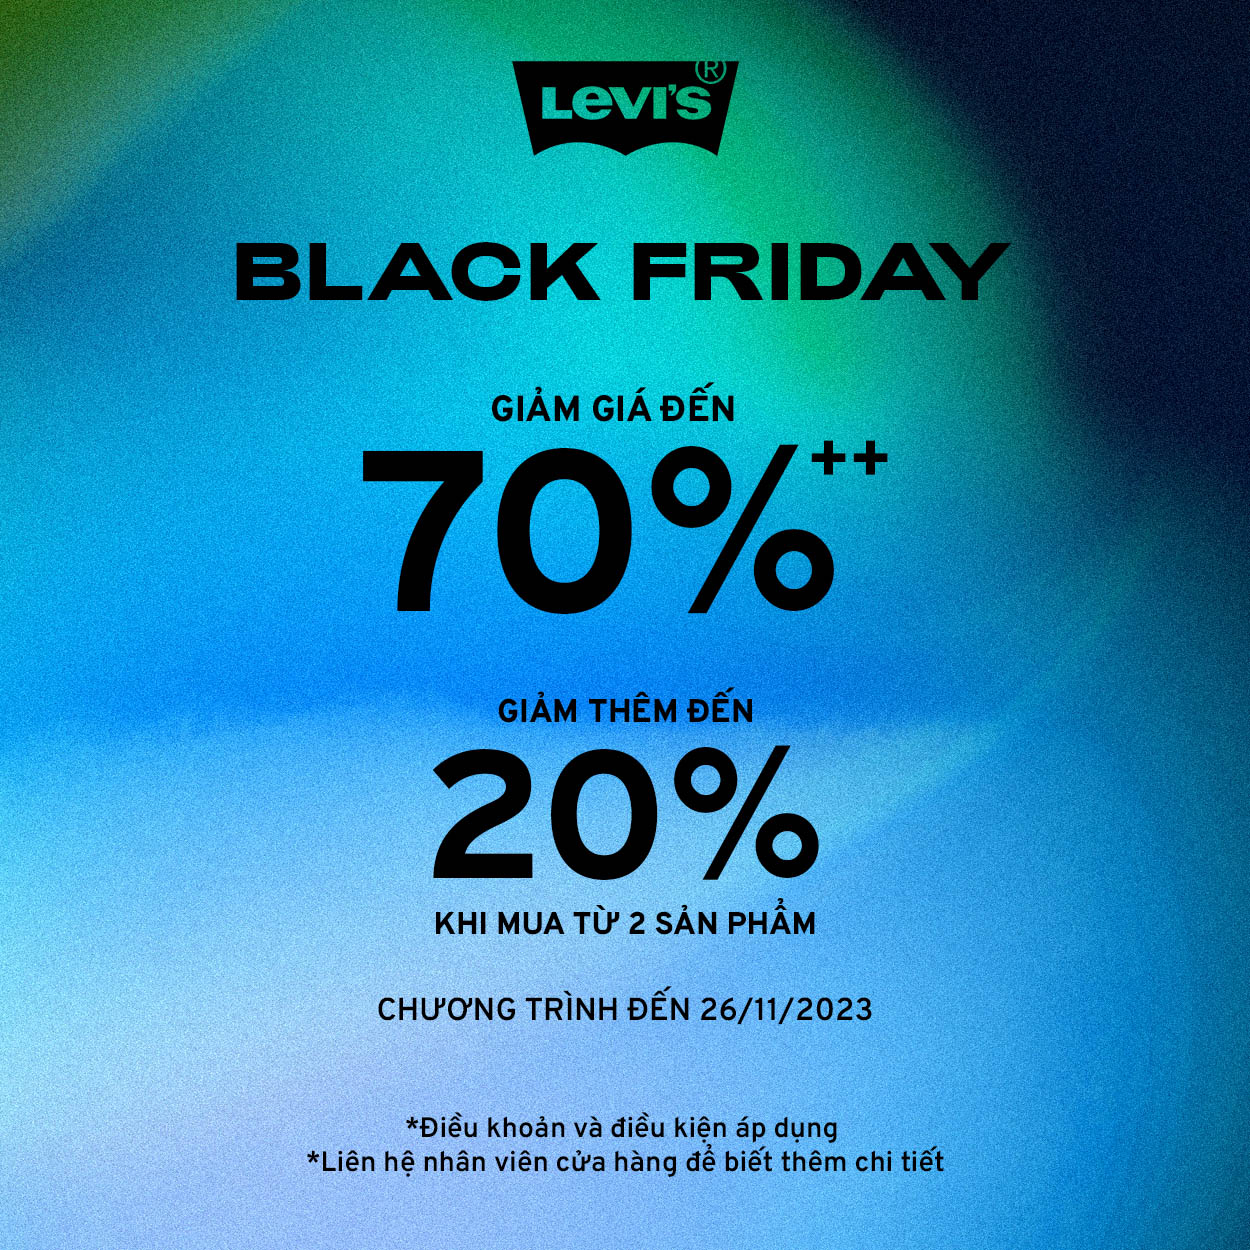 LEVI’S BLACK FRIDAY – SALE UP TO 70%++